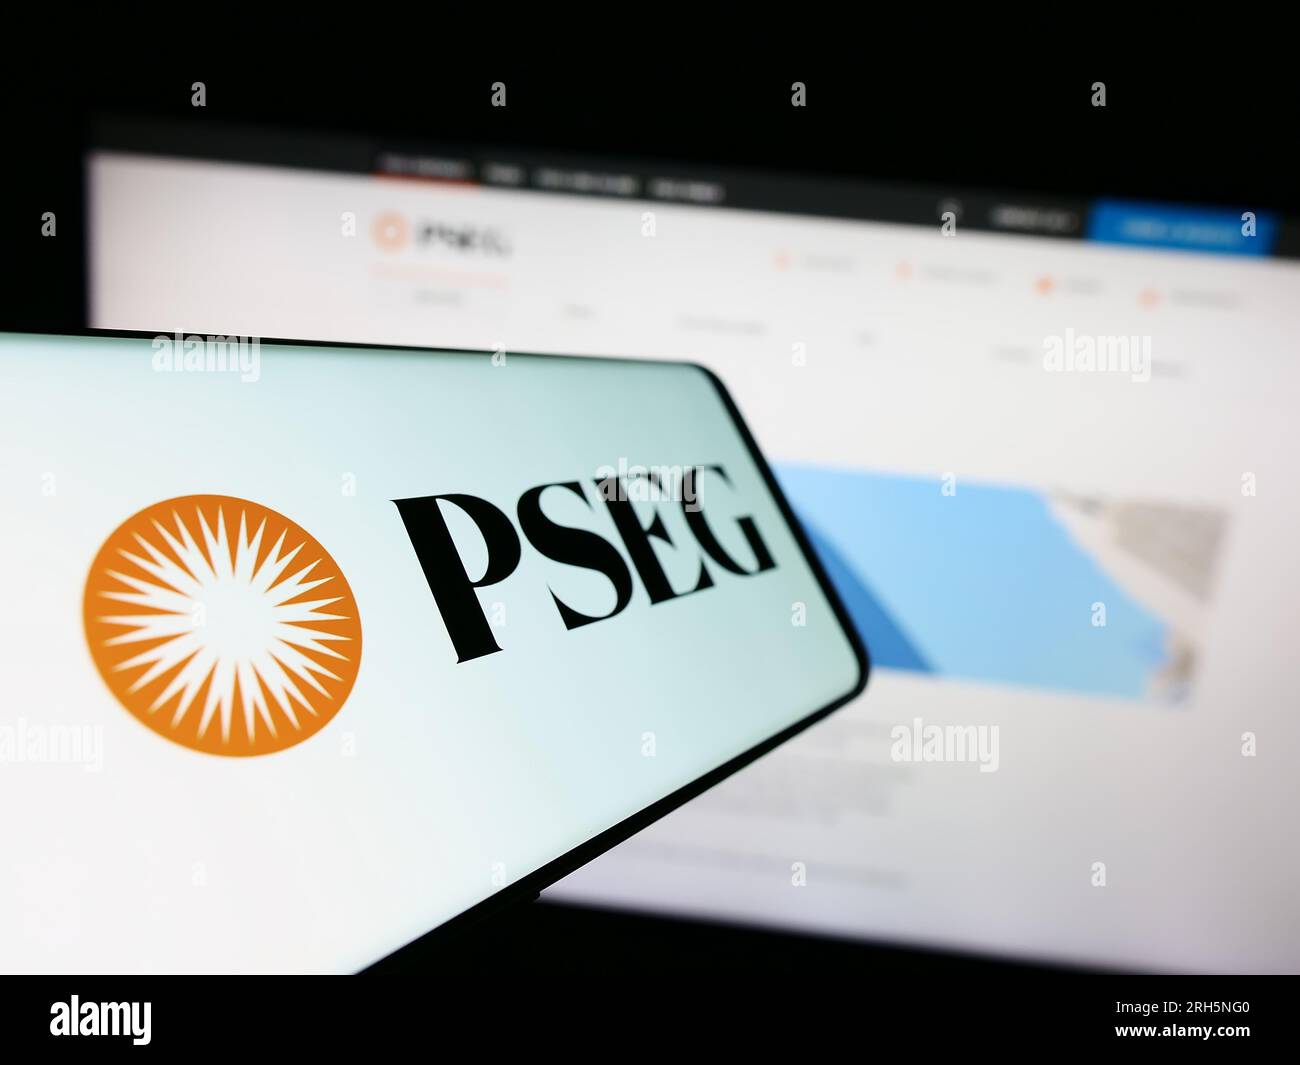 Mobile phone with logo of company Public Service Enterprise Group (PSEG) on screen in front of website. Focus on center-left of phone display. Stock Photo